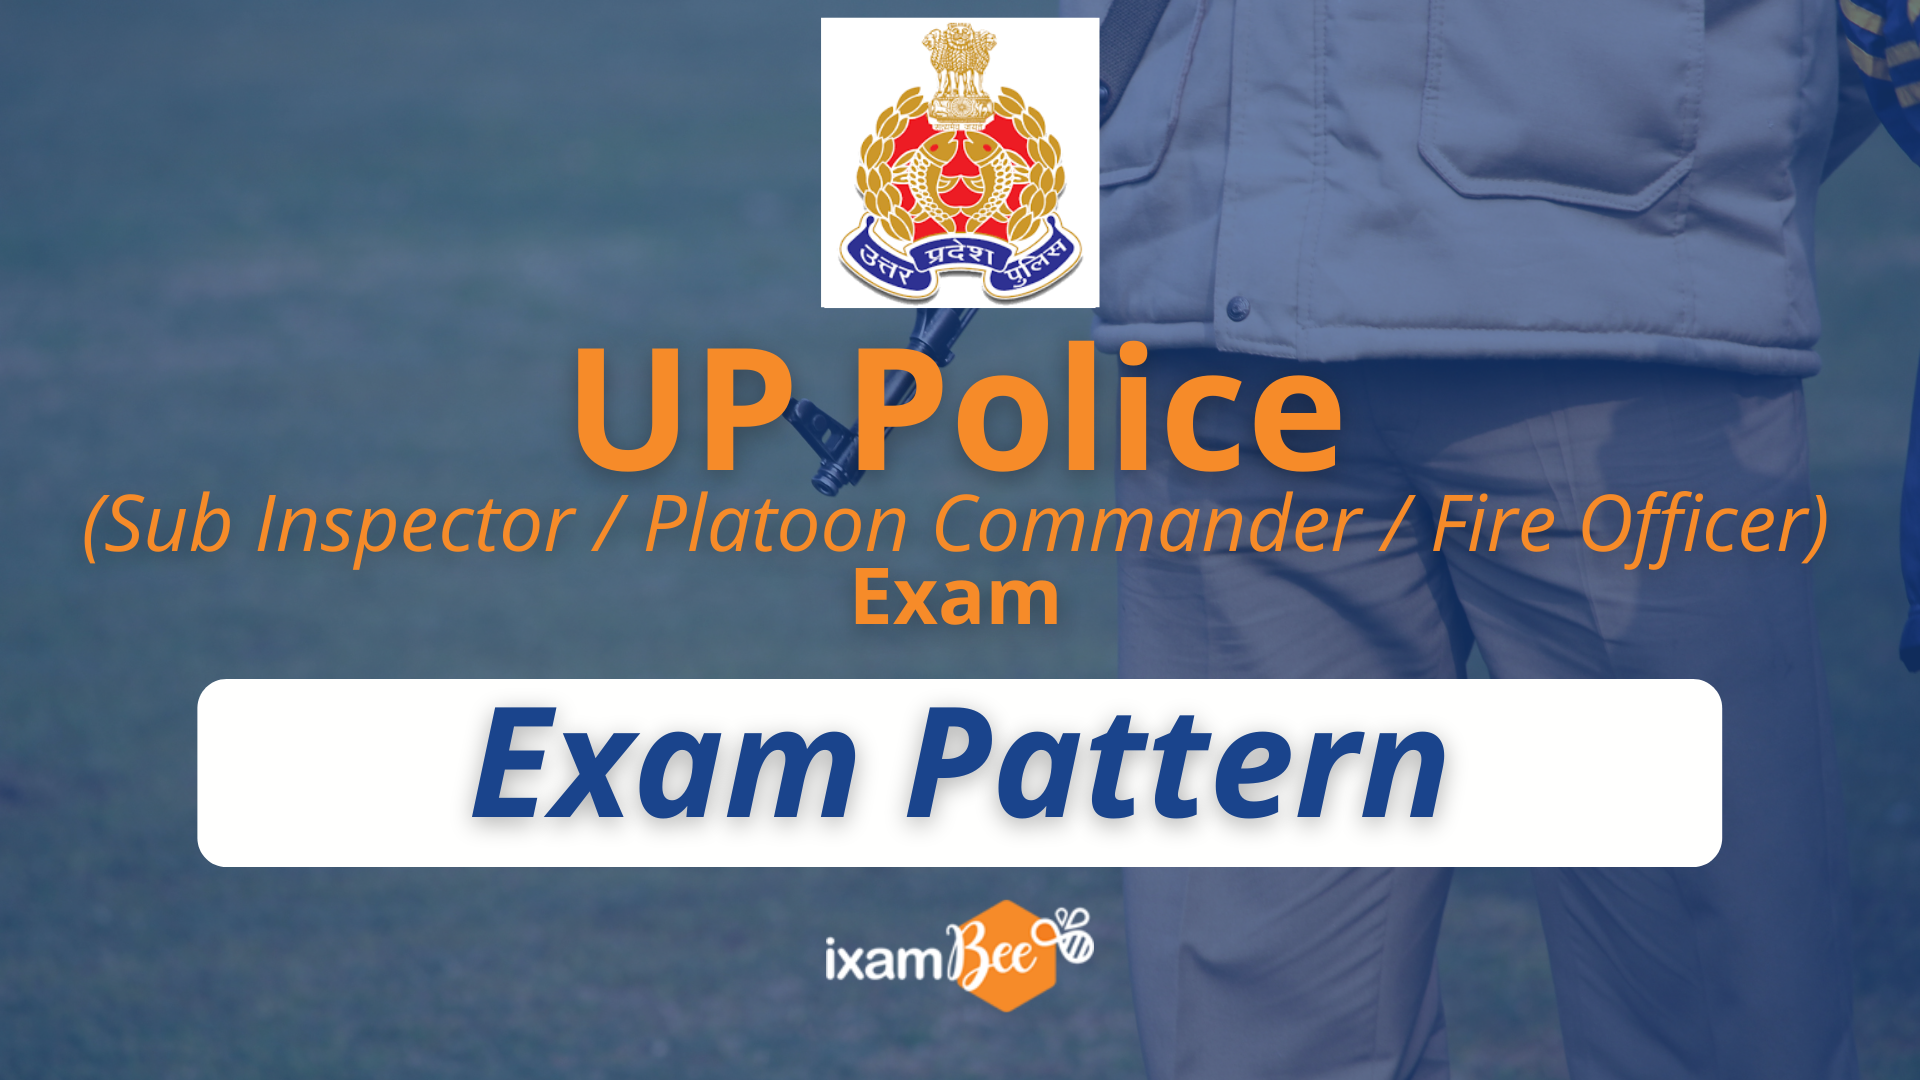 UP Police (Sub Inspector, Platoon Commander, and Fire Officer) Exam Syllabus